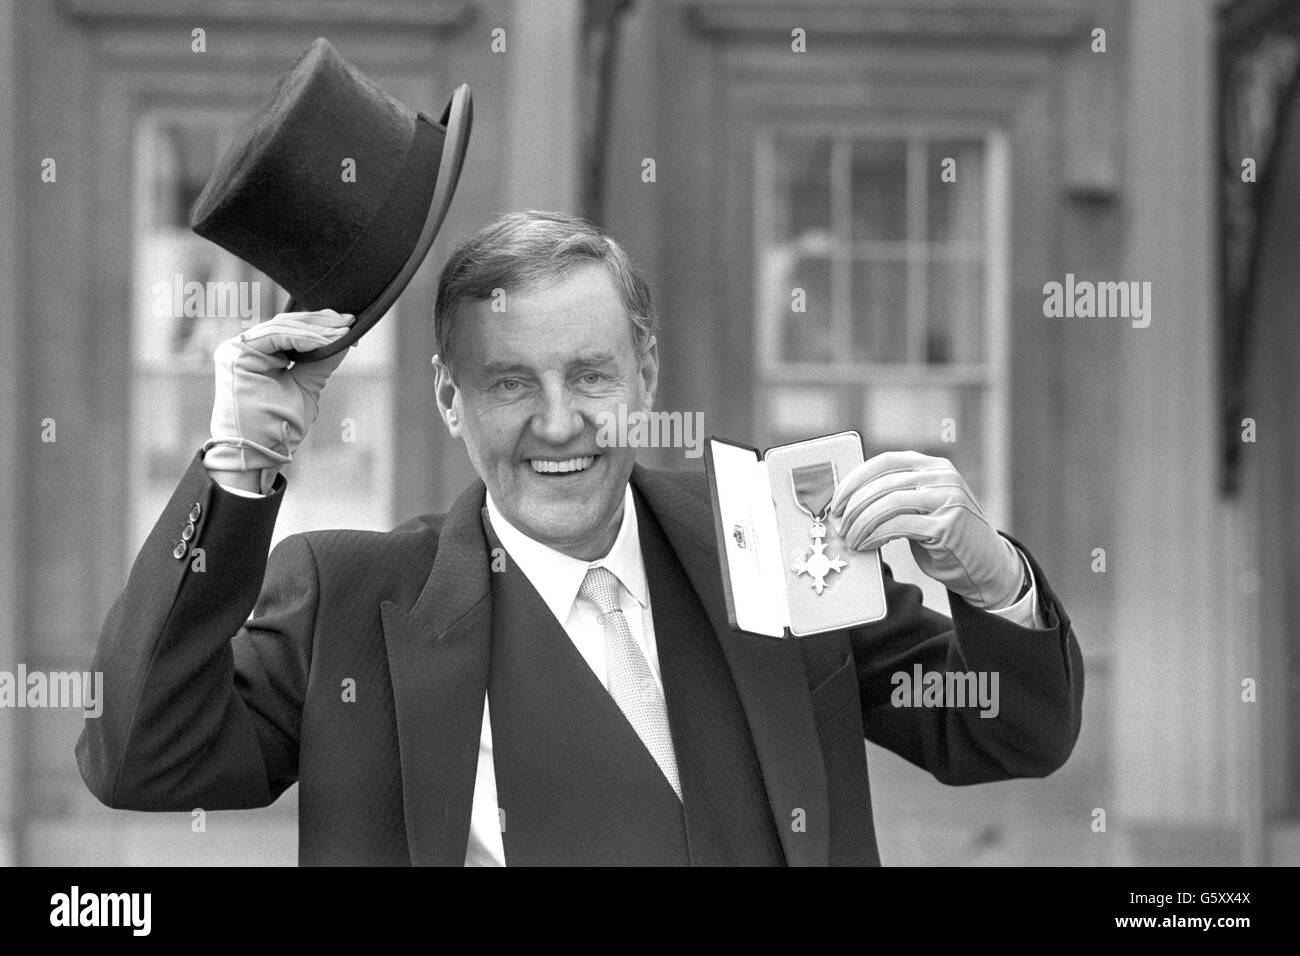 Actor Richard Briers, 56, outside Buckingham Palace. He received an OBE from the Queen for services to acting. Stock Photo